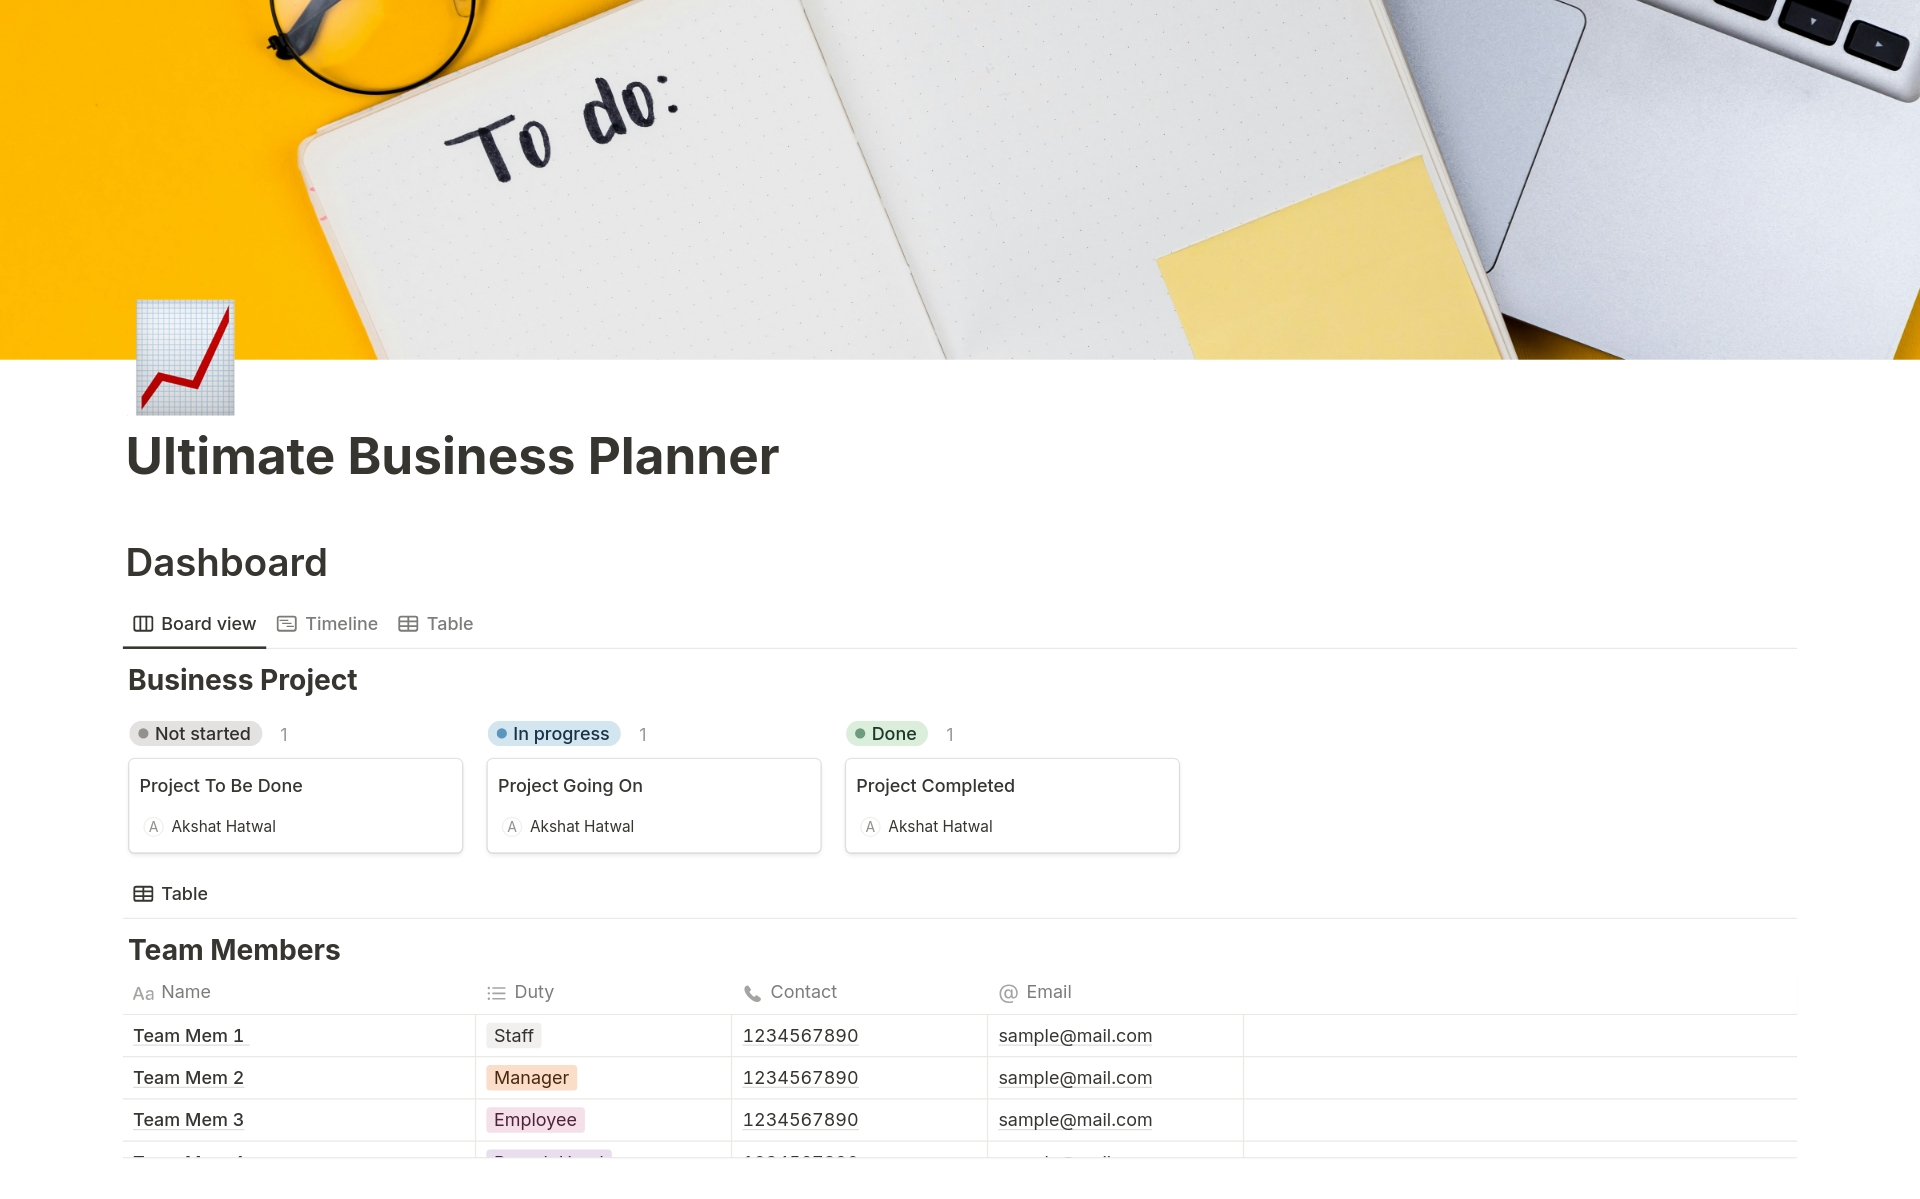 Introducing the Ultimate Business Planner: Minimalism that Maximizes Results.
This FREE template ditches the clutter and keeps you focused.  Its sleek aesthetic inspires action, skyrocketing your productivity without breaking the bank.  Take control of your business today.